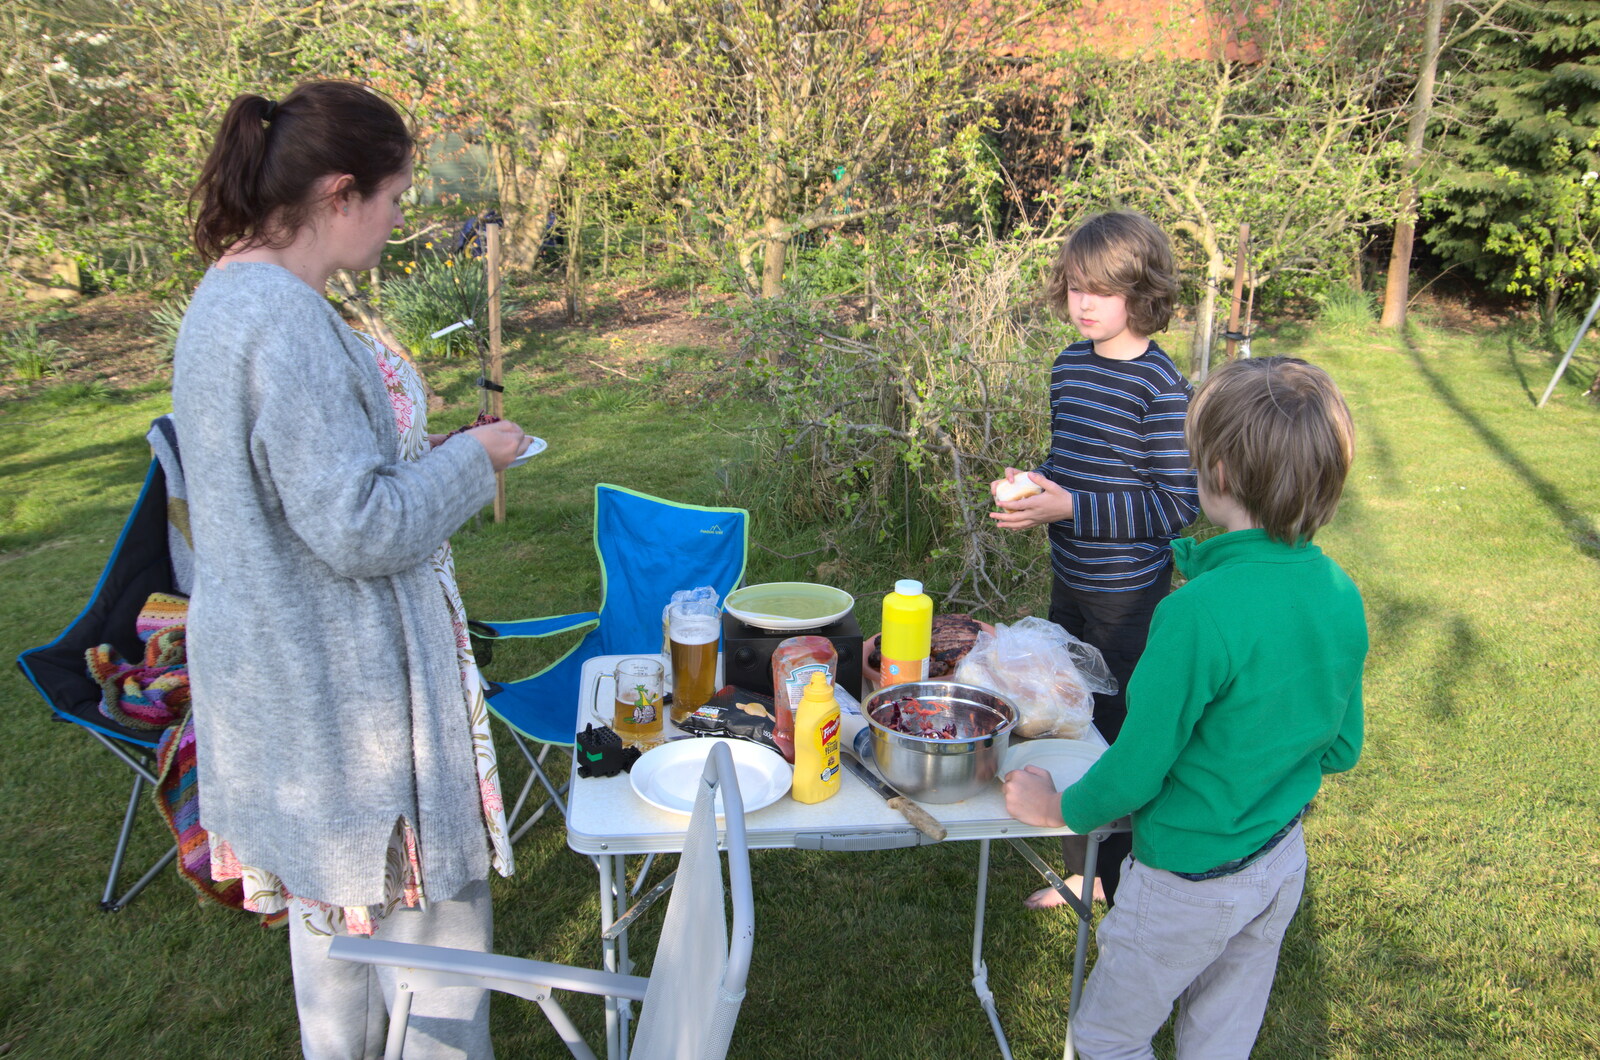 Time for tea from A Weekend Camping Trip in the Garden, Brome, Suffolk - 11th April 2020